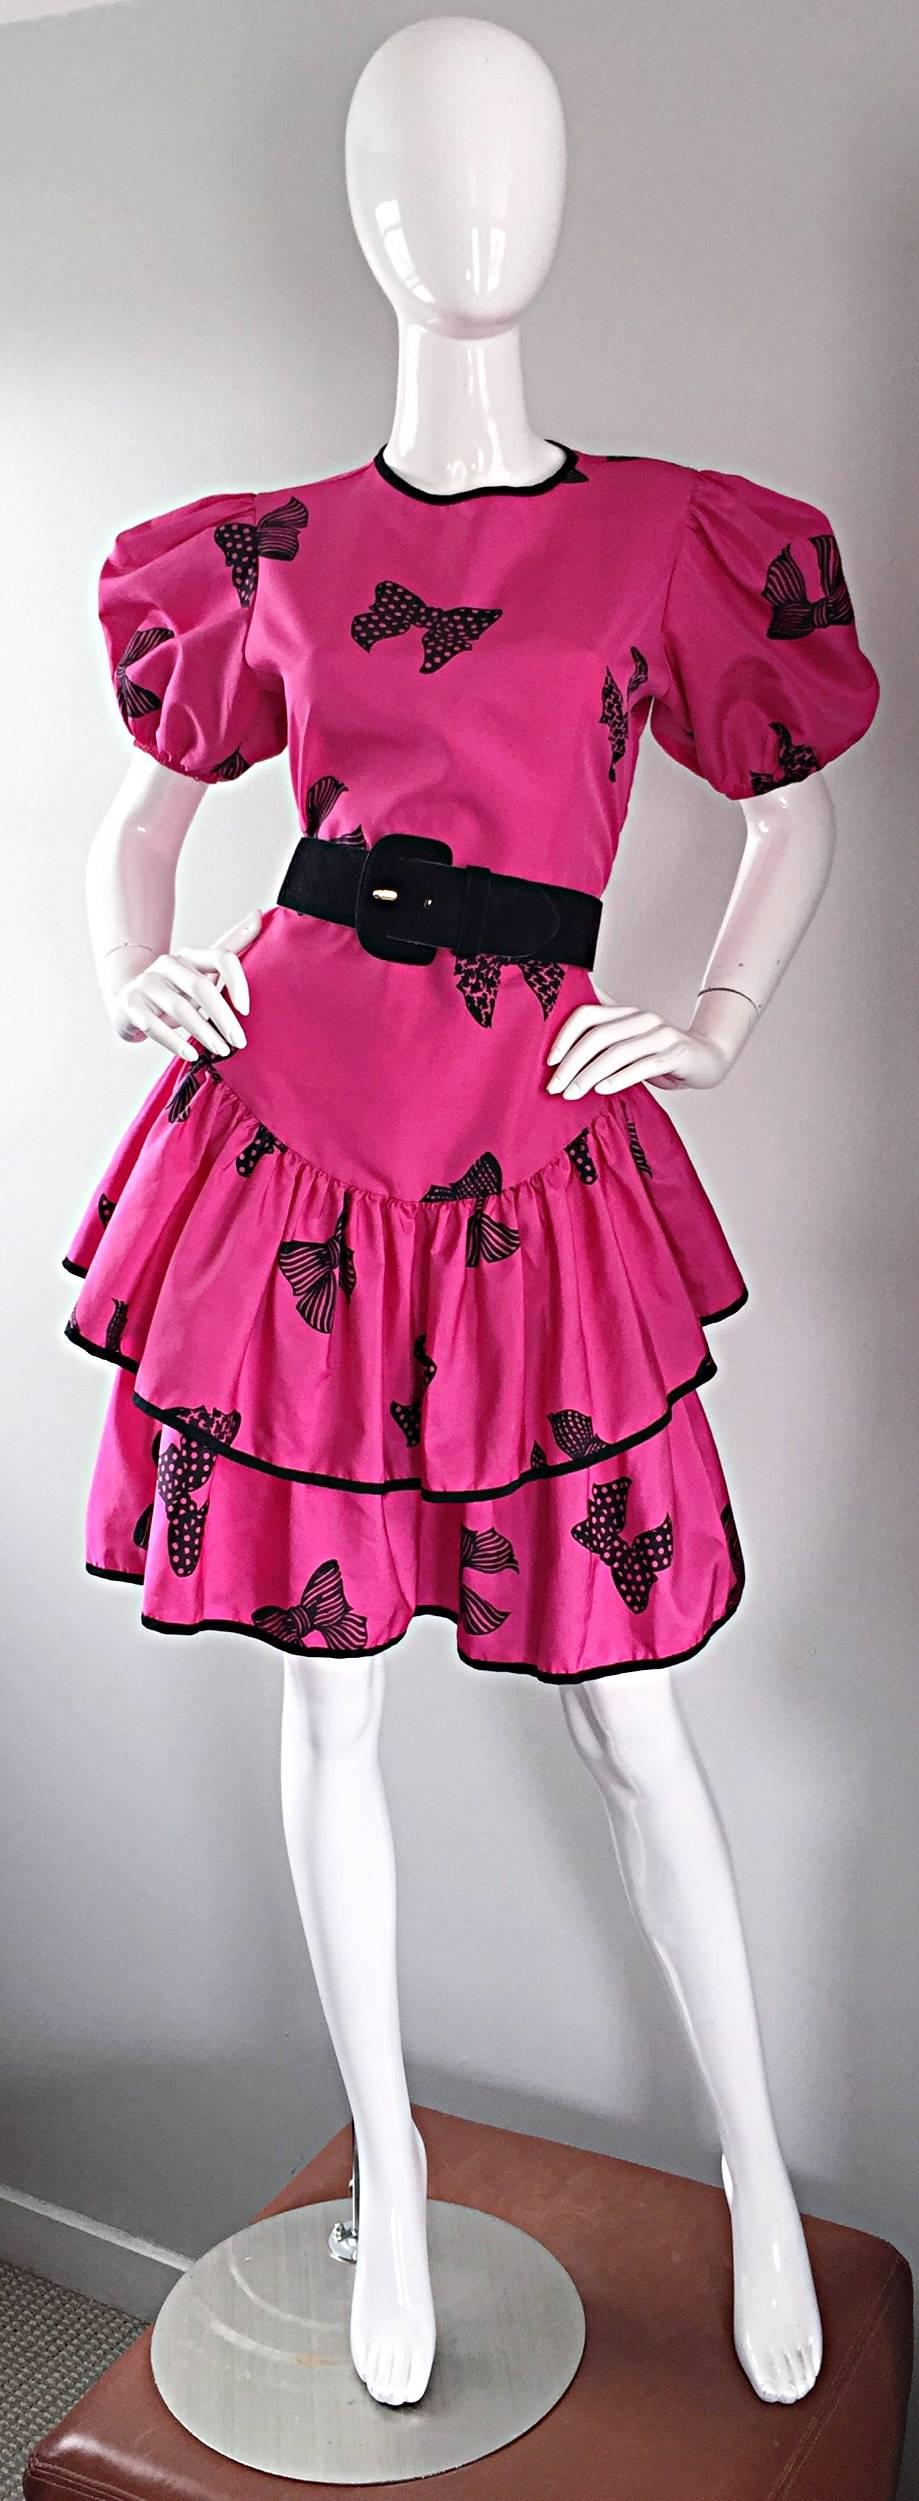 Incredible vintage 1980s BETSEY JOHNSON ' Punk Label ' shocking hot pink and black printed bow dress! There is so much detail to this gem! Tiered cupcake skirt, with a fitted bodice and full pouf sleeves. Black trimmed hems and collar, with elastic